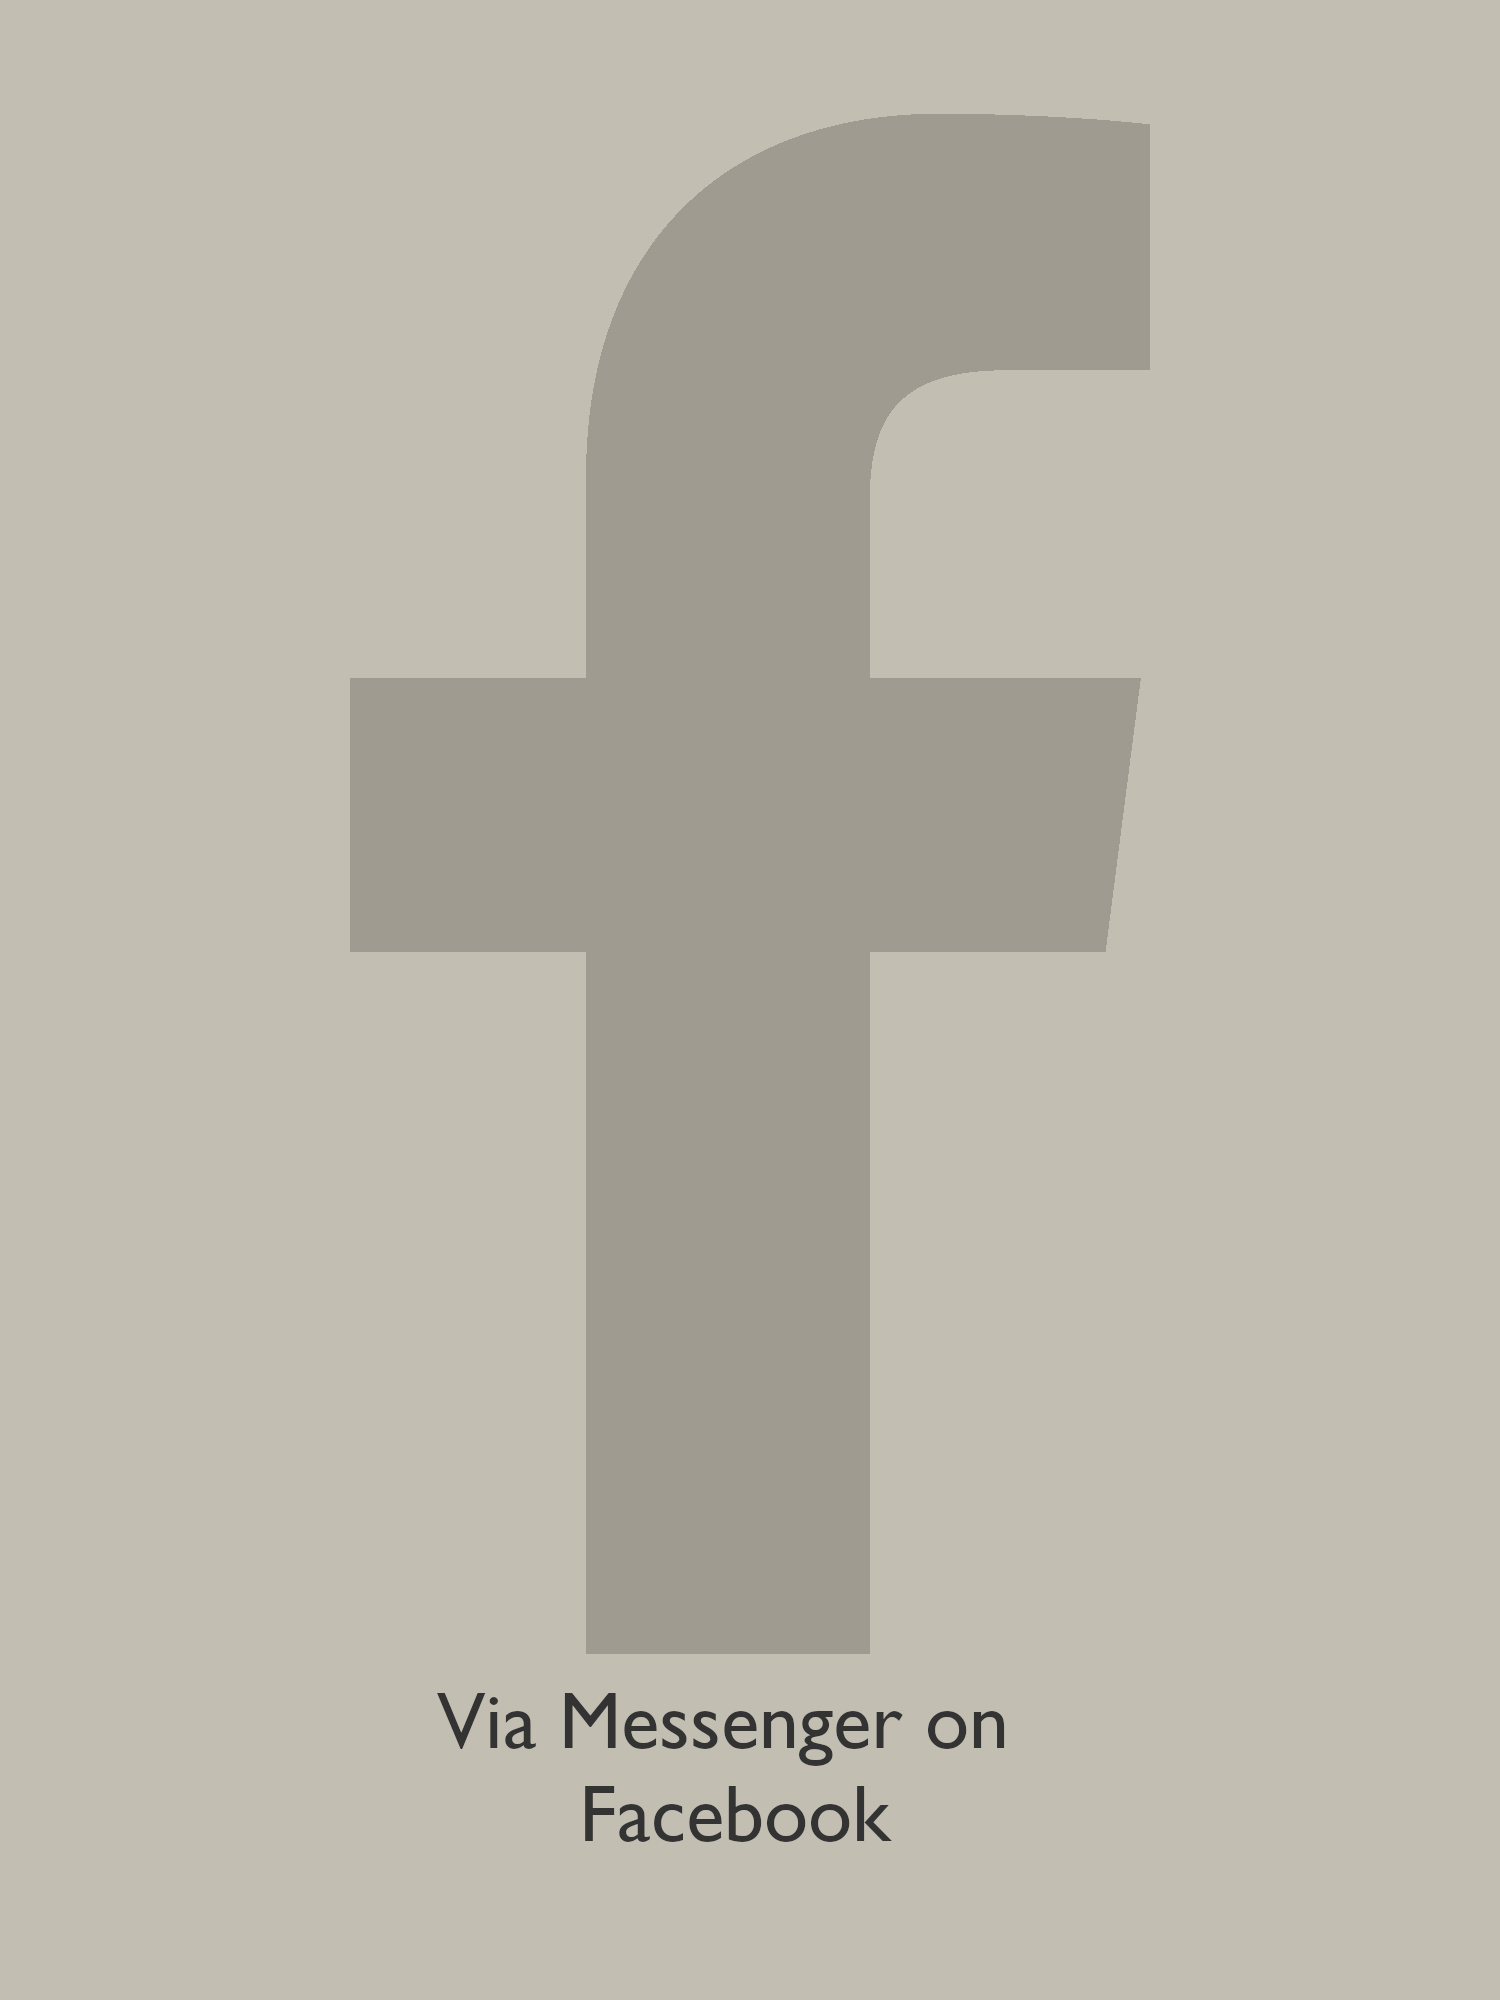 Contact Franskaya through Facebook Messenger by selecting this button